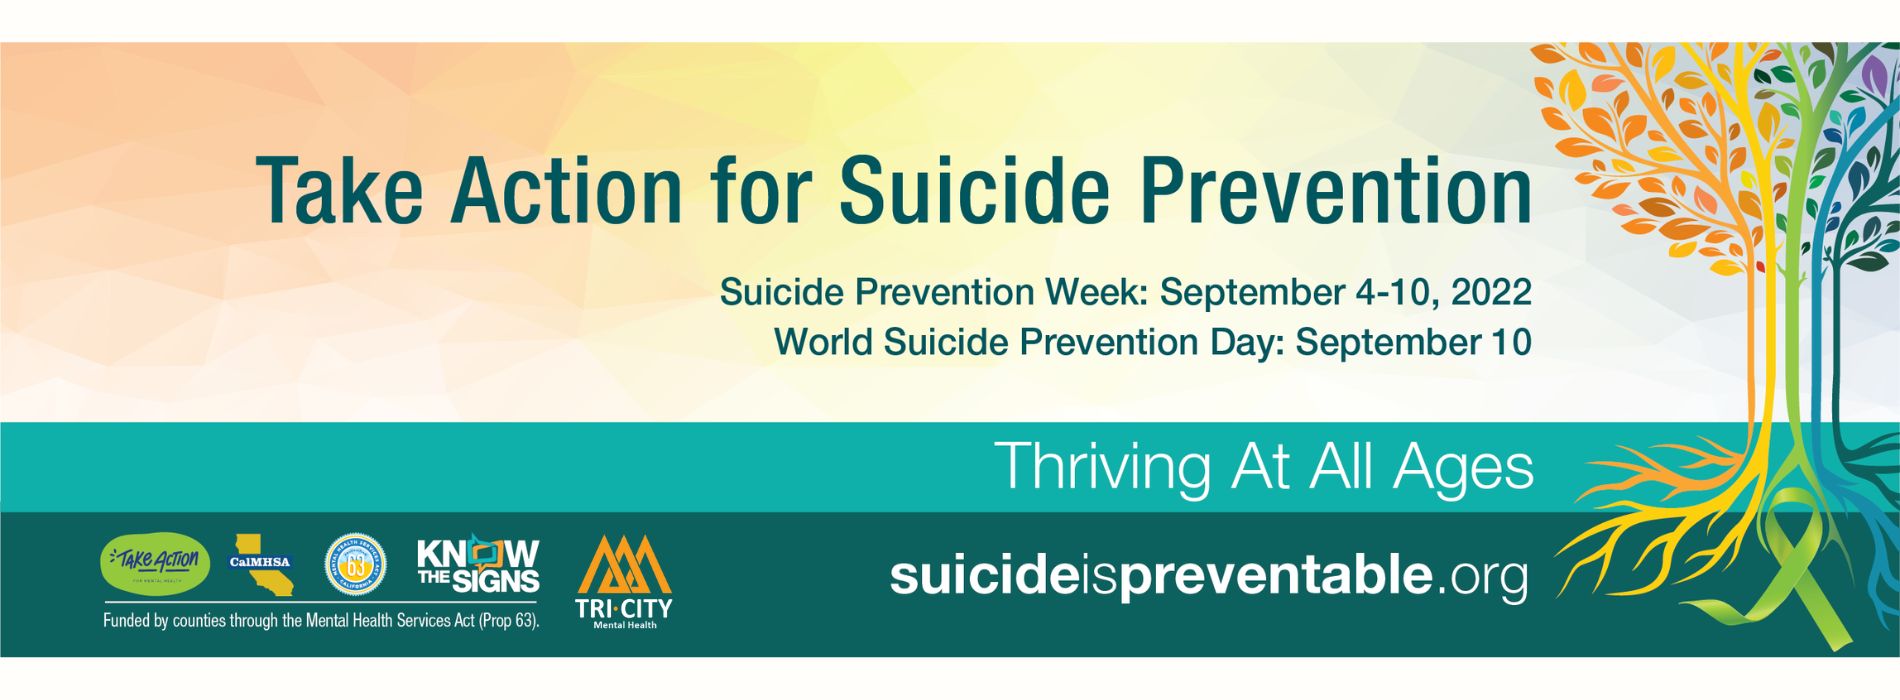 Take Action for Suicide Prevention. Suicide Prevention Week is September 4-10, 2022. World Suicide Prevention Day is September 10. For more information, visit suicideispreventable.org.